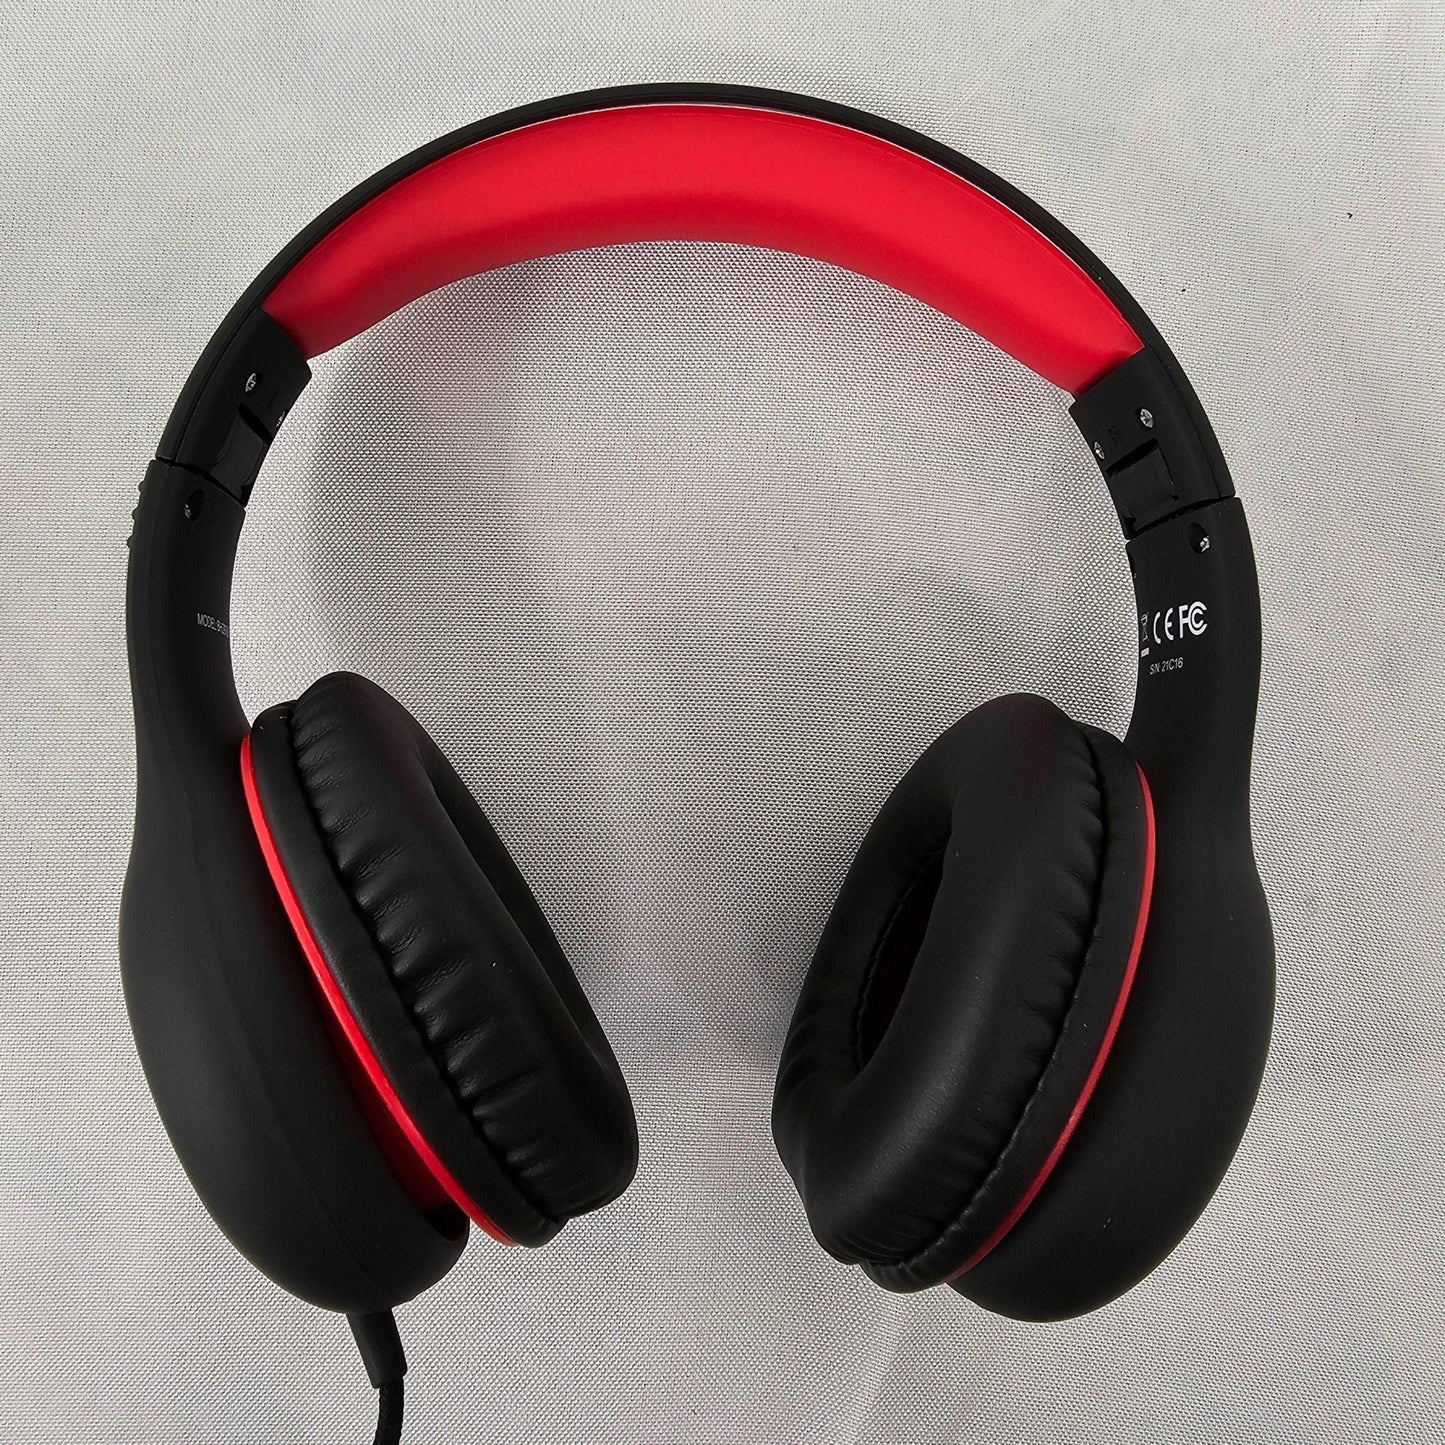 Kids Wired Headphones - Safe Audio, Music Sharing, Foldable Design - DQ Distribution